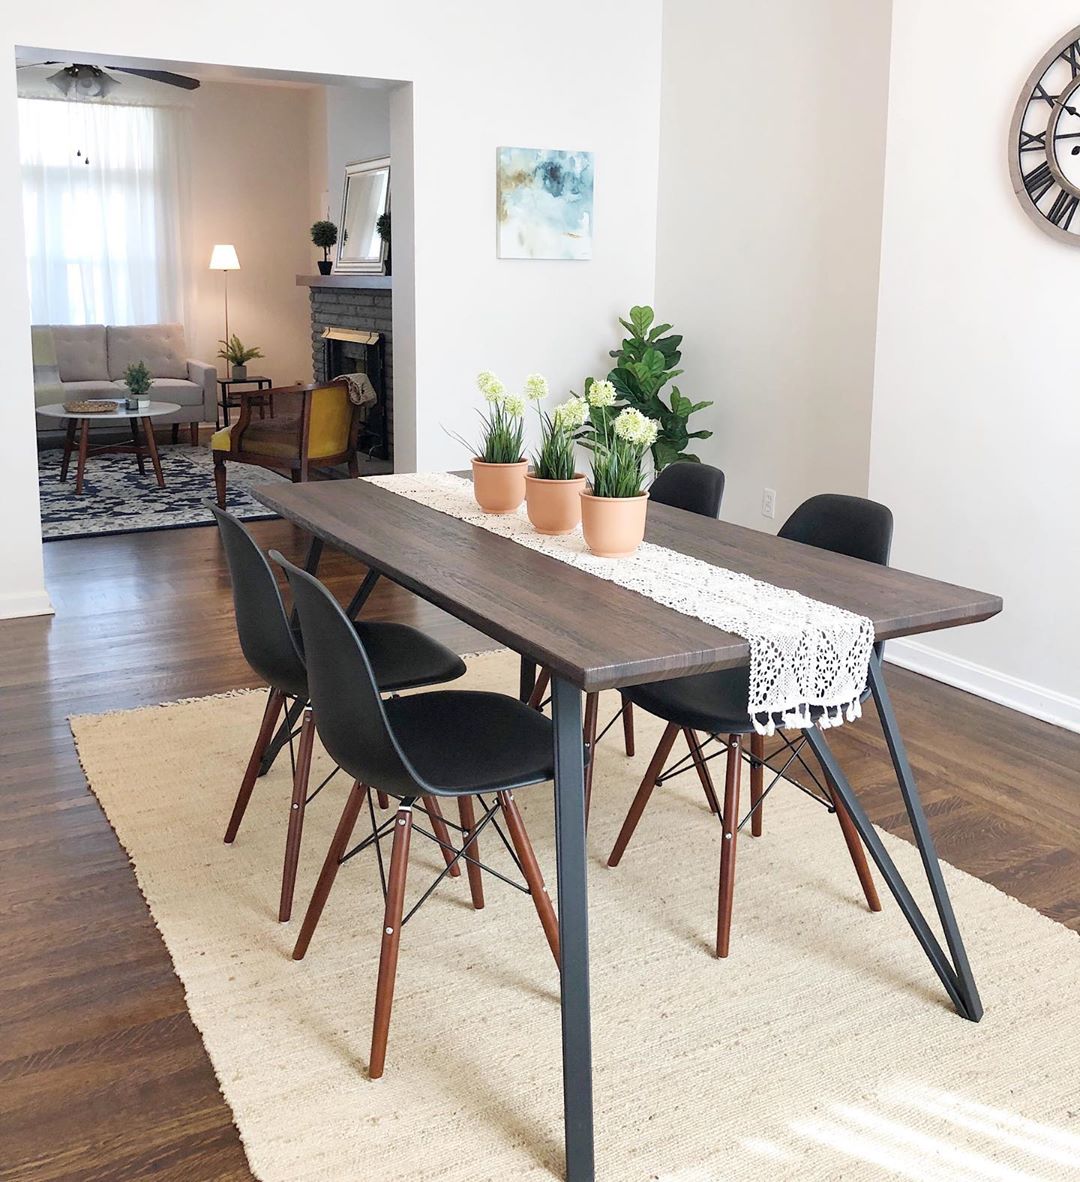 Staged home with modern dining room. Photo by Instagram user @layofthelandstaging